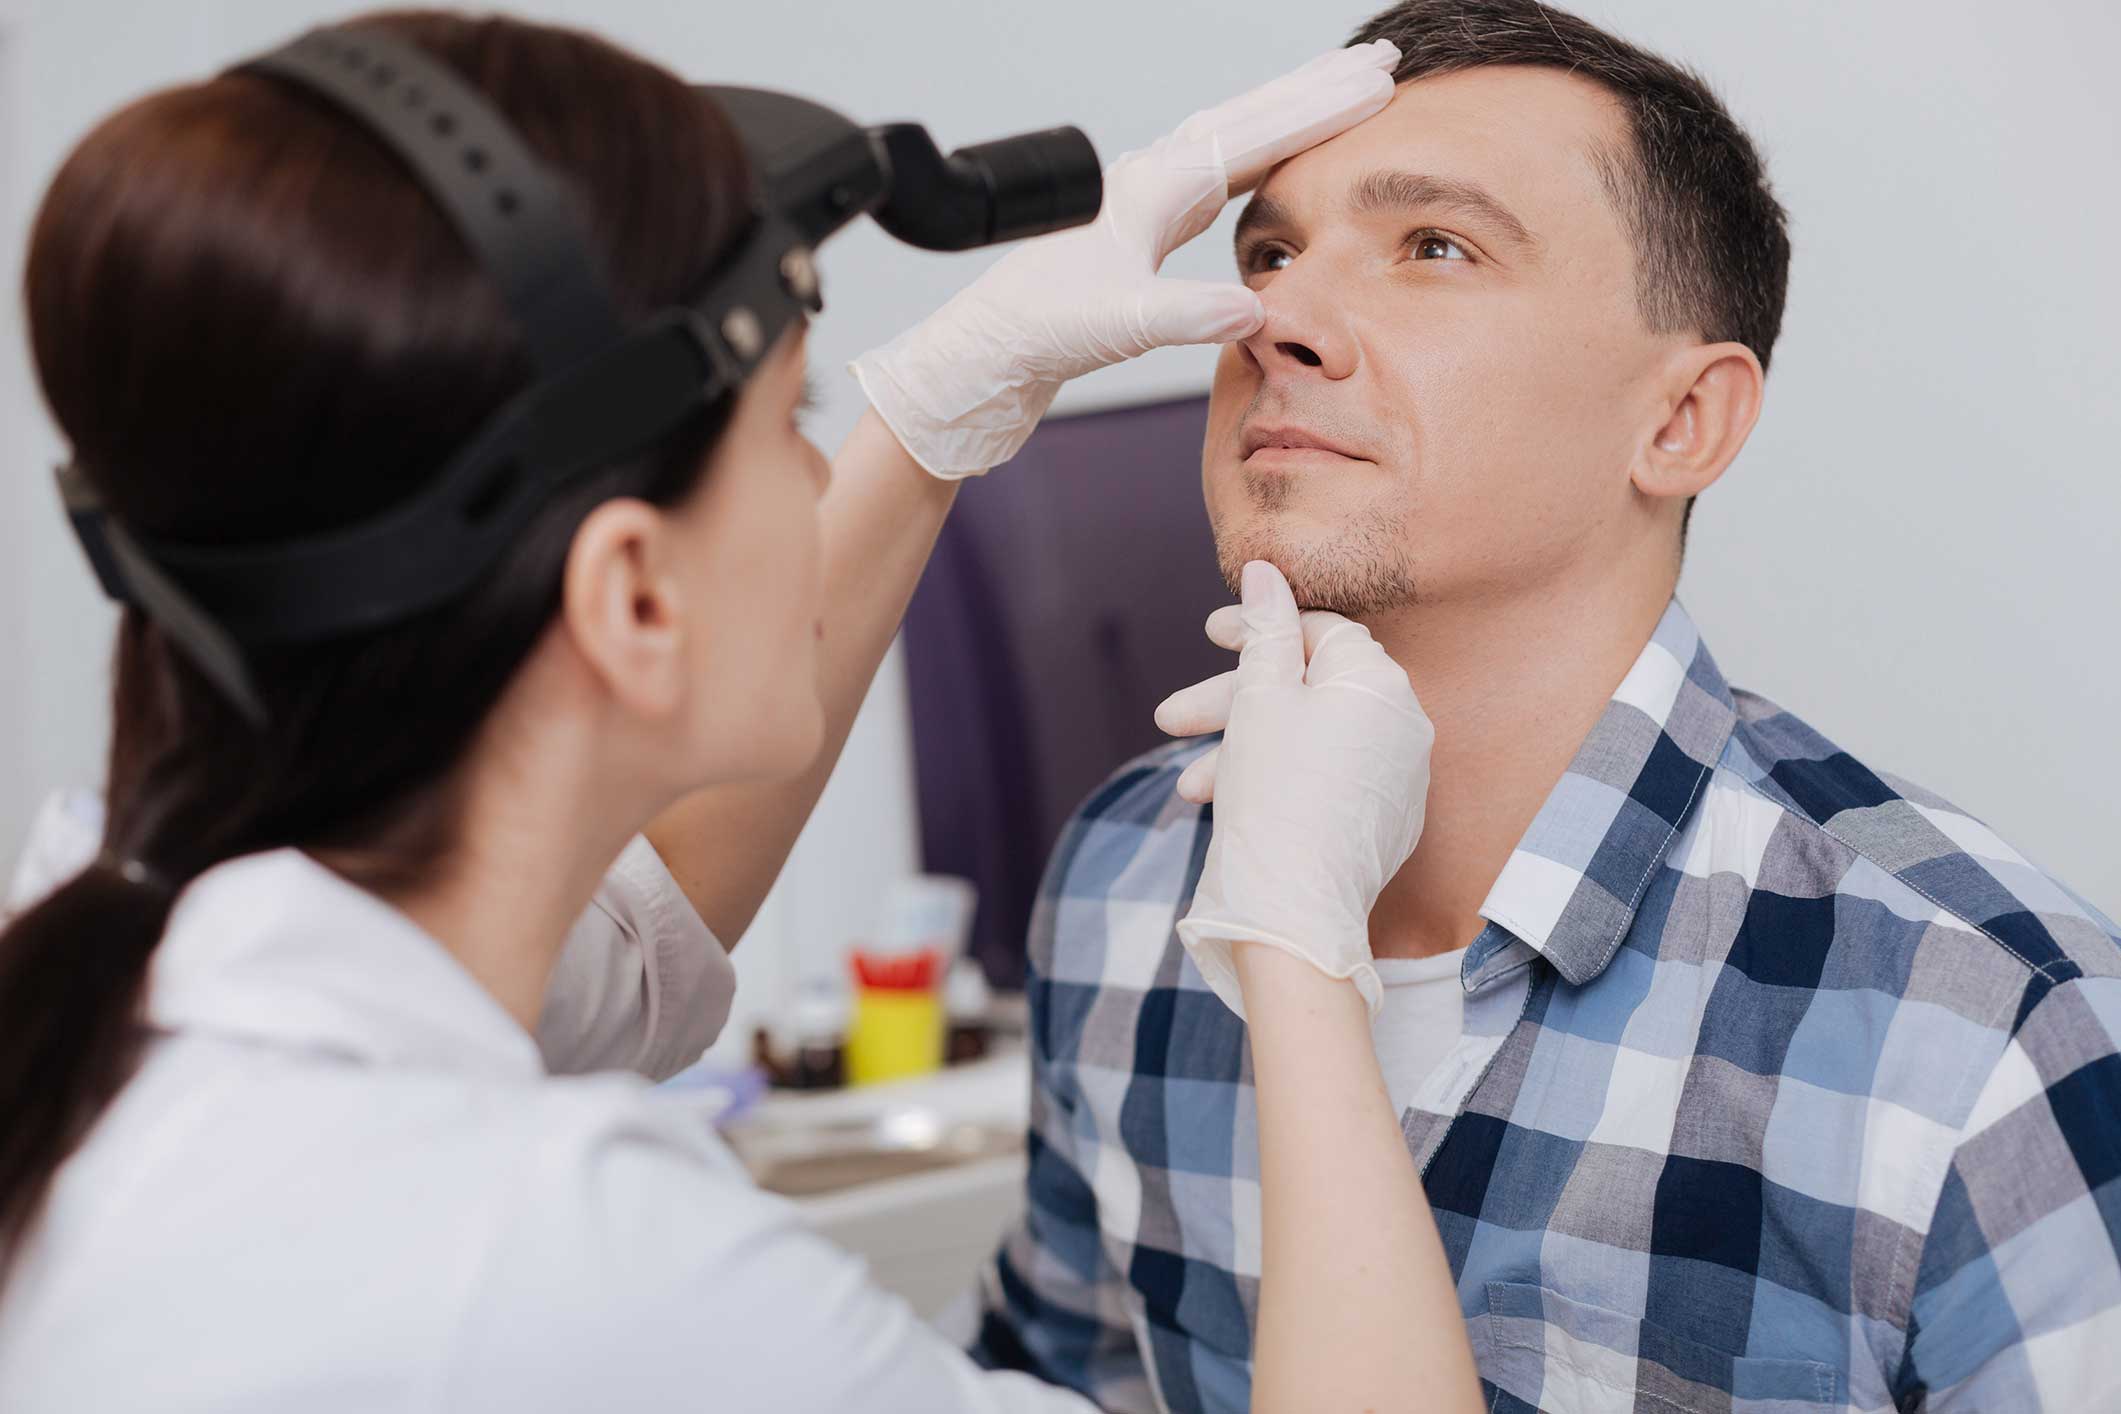 Doctor examining a patient's nose